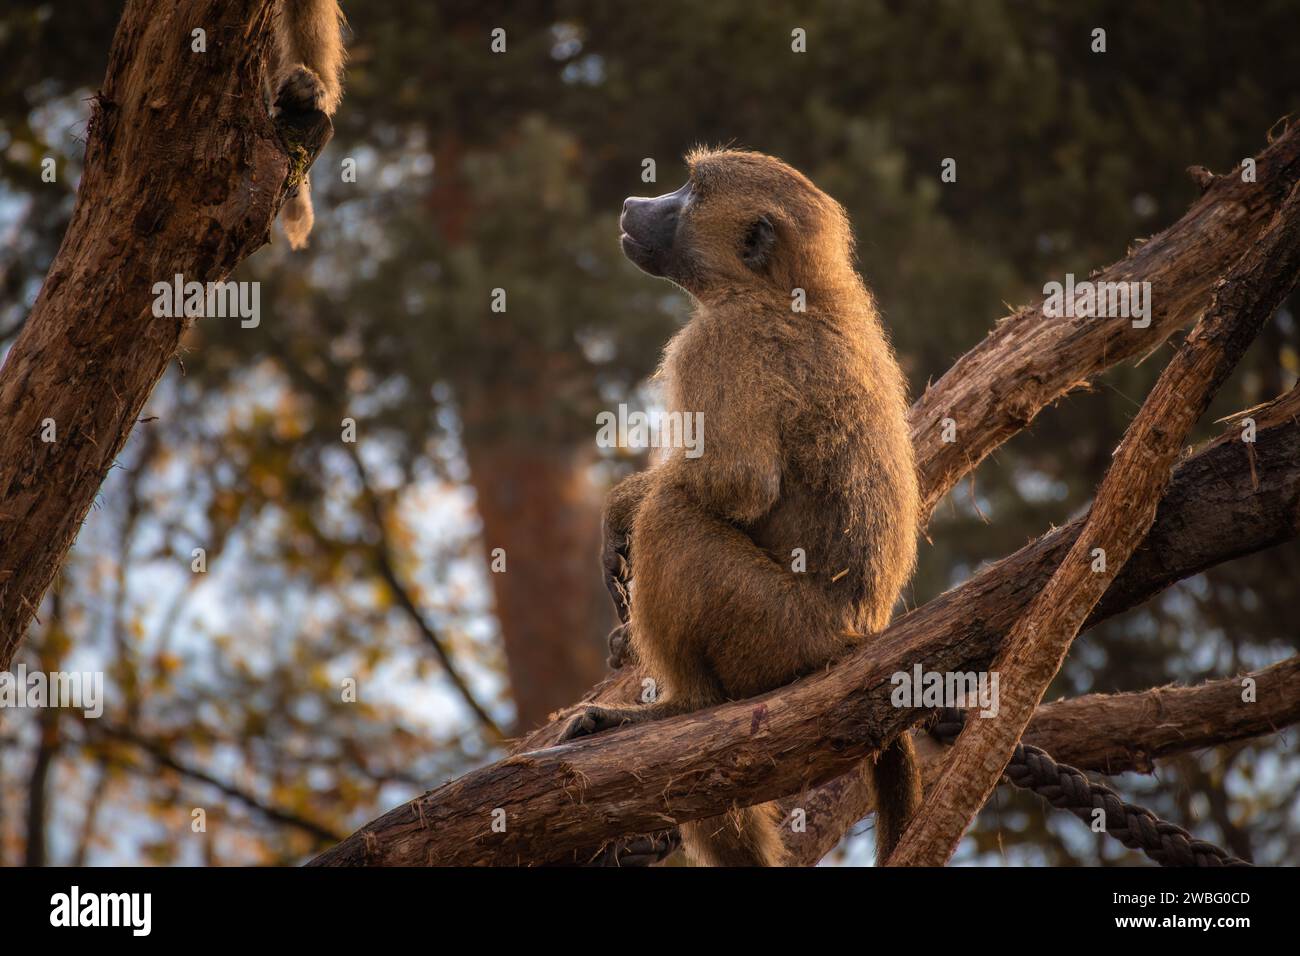 Guinea Baboon Sits on Tree Trunk in Zoo. Cute Animal in Zoological Garden in Autumn. Stock Photo